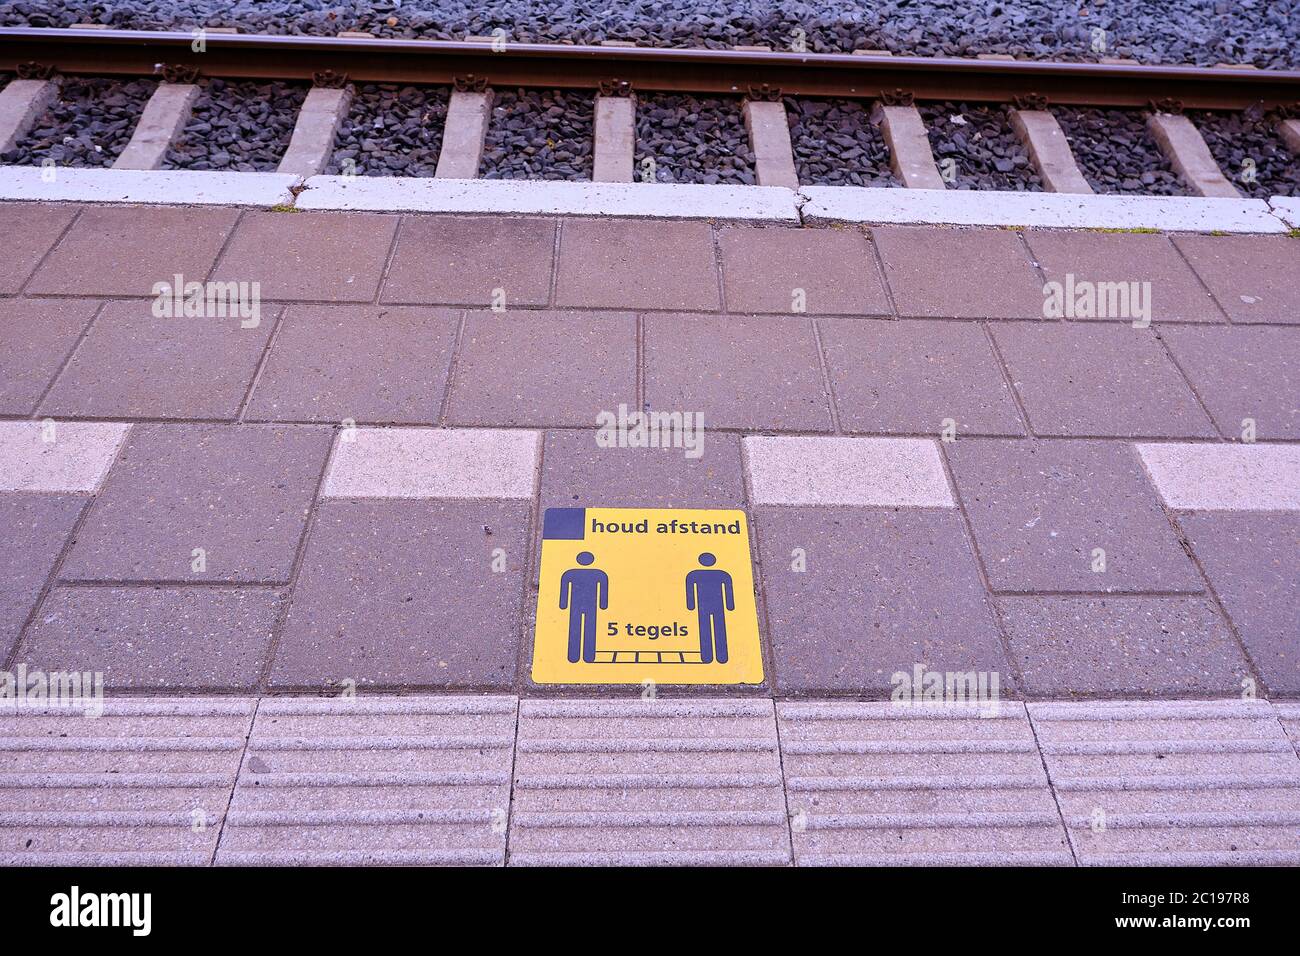 Yellow footprint sign on tiles in platform Dalfsen railway station. Dutch social distance words keep five tiles, 1,5 metres distance, against spread c Stock Photo